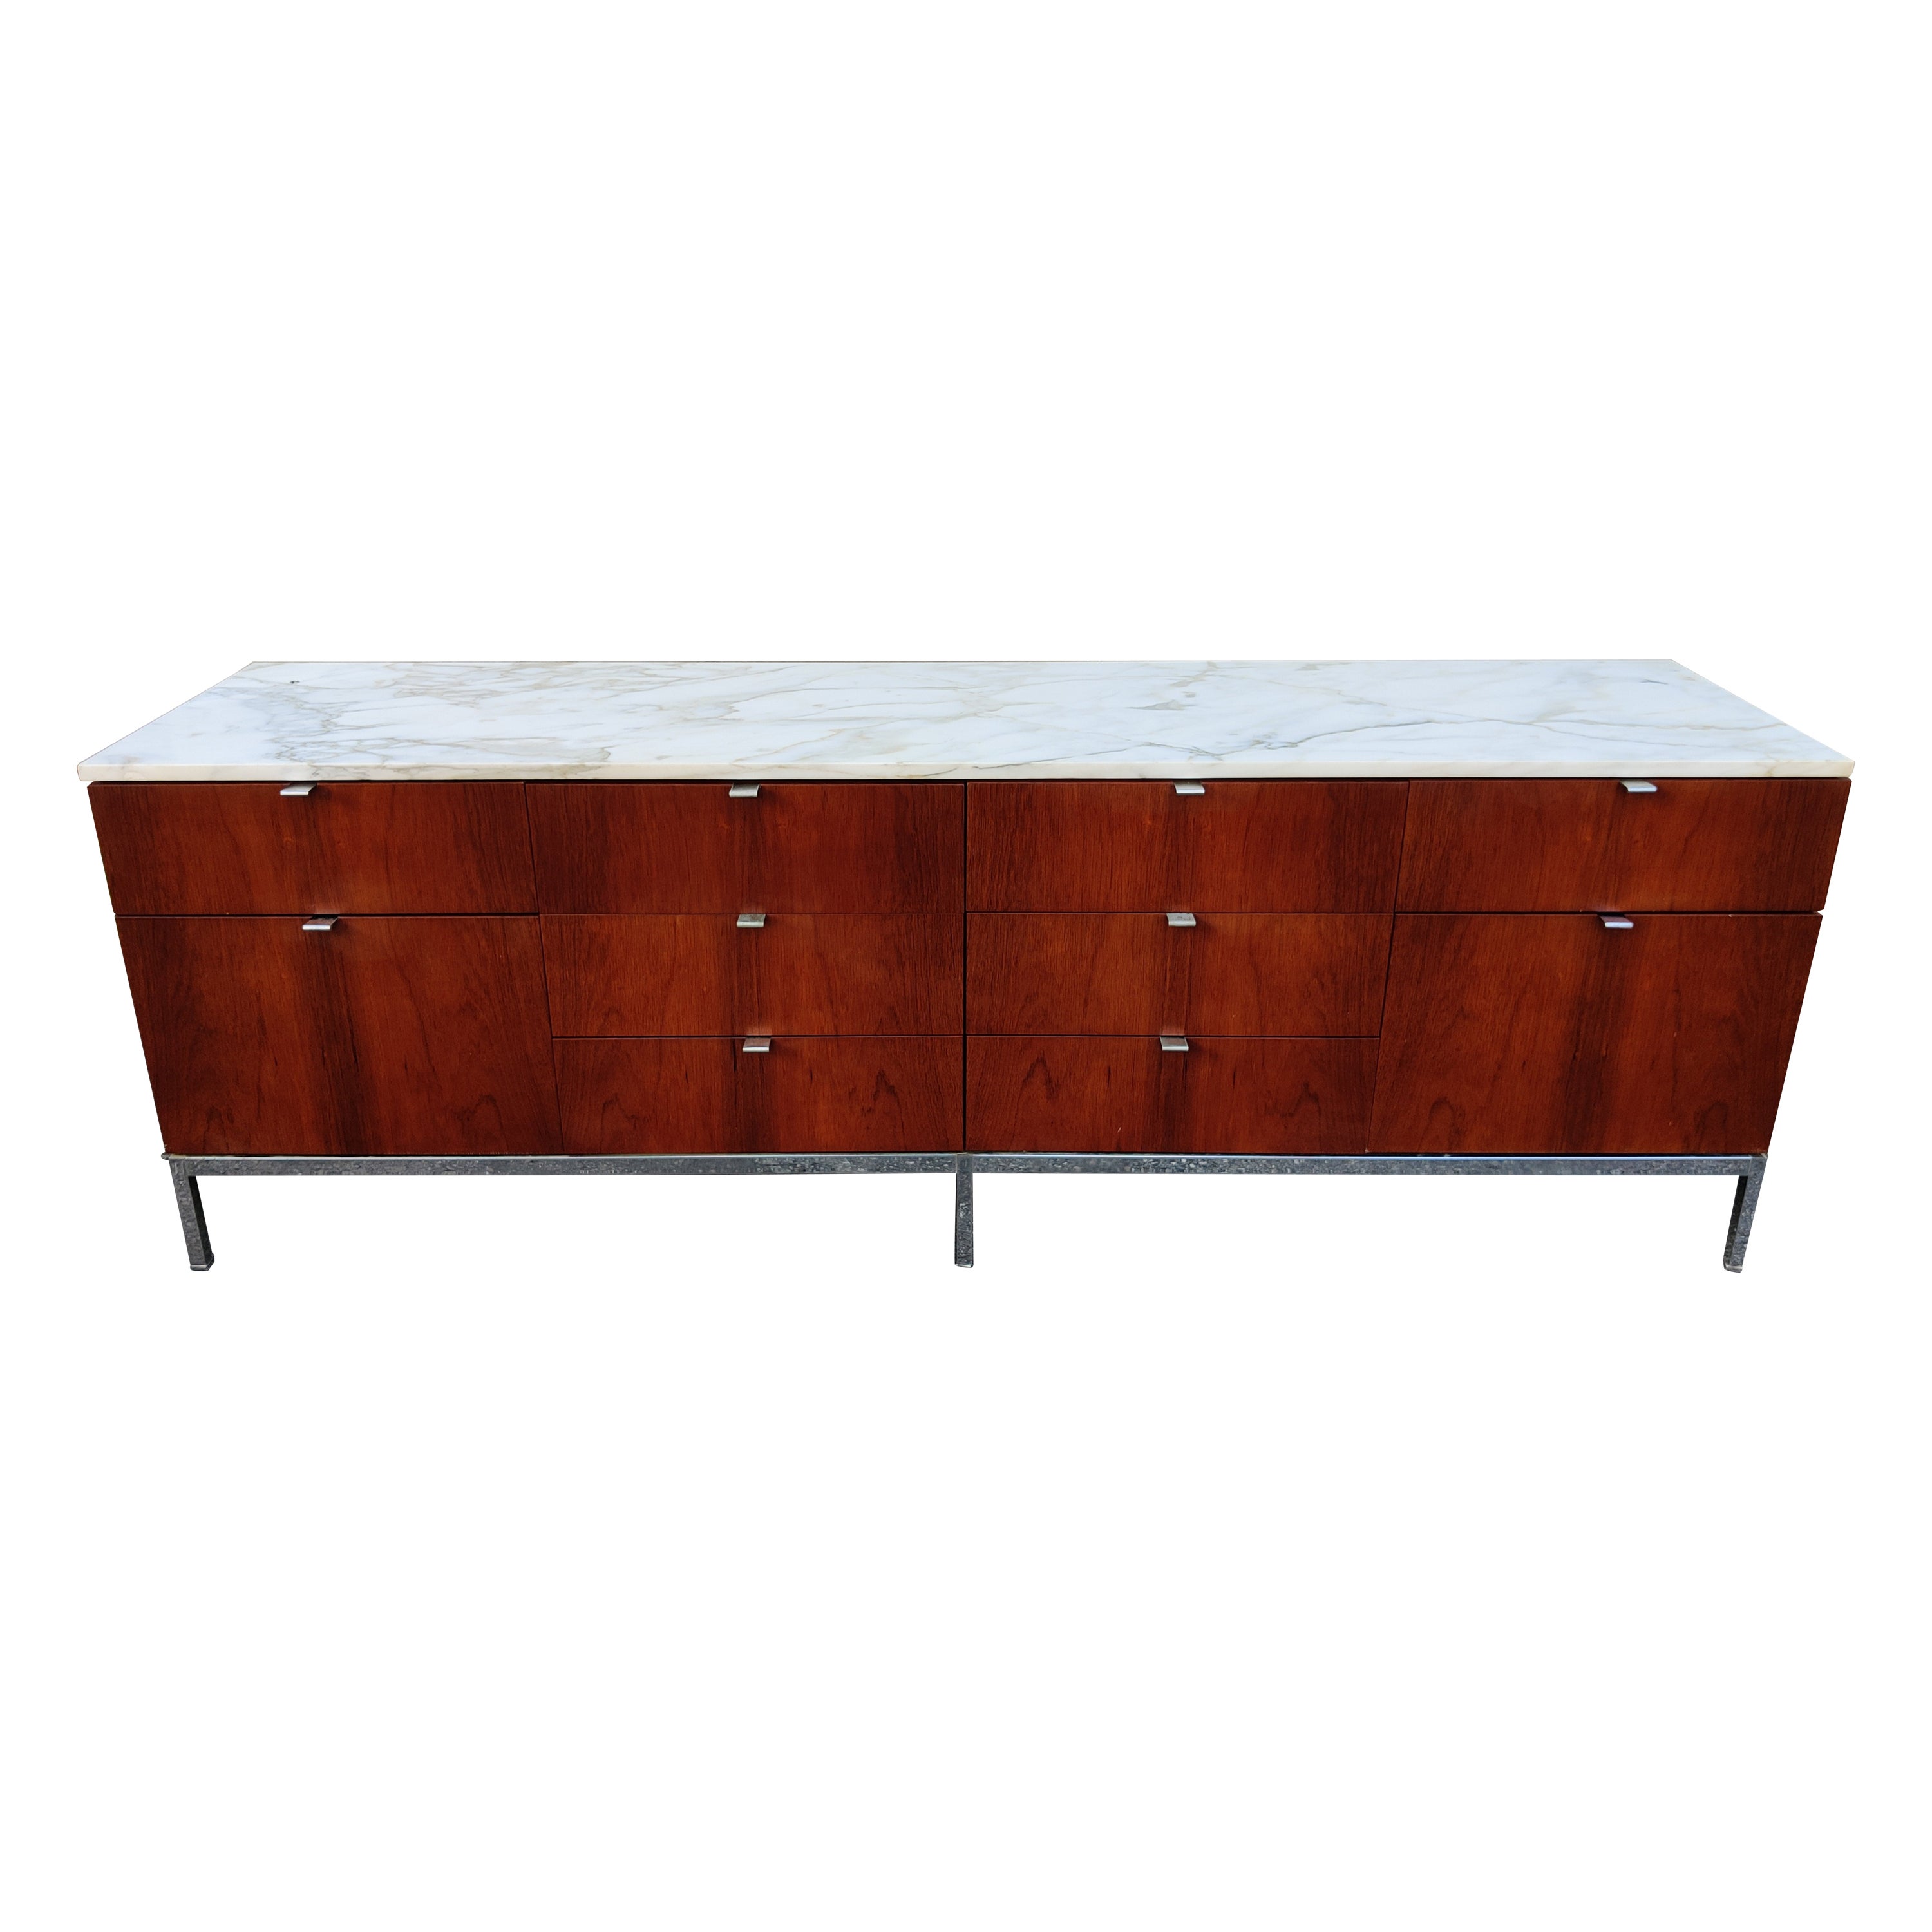 74" Long Calacatta Marble Rosewood Florence Knoll Executive Credenza Cabinet For Sale